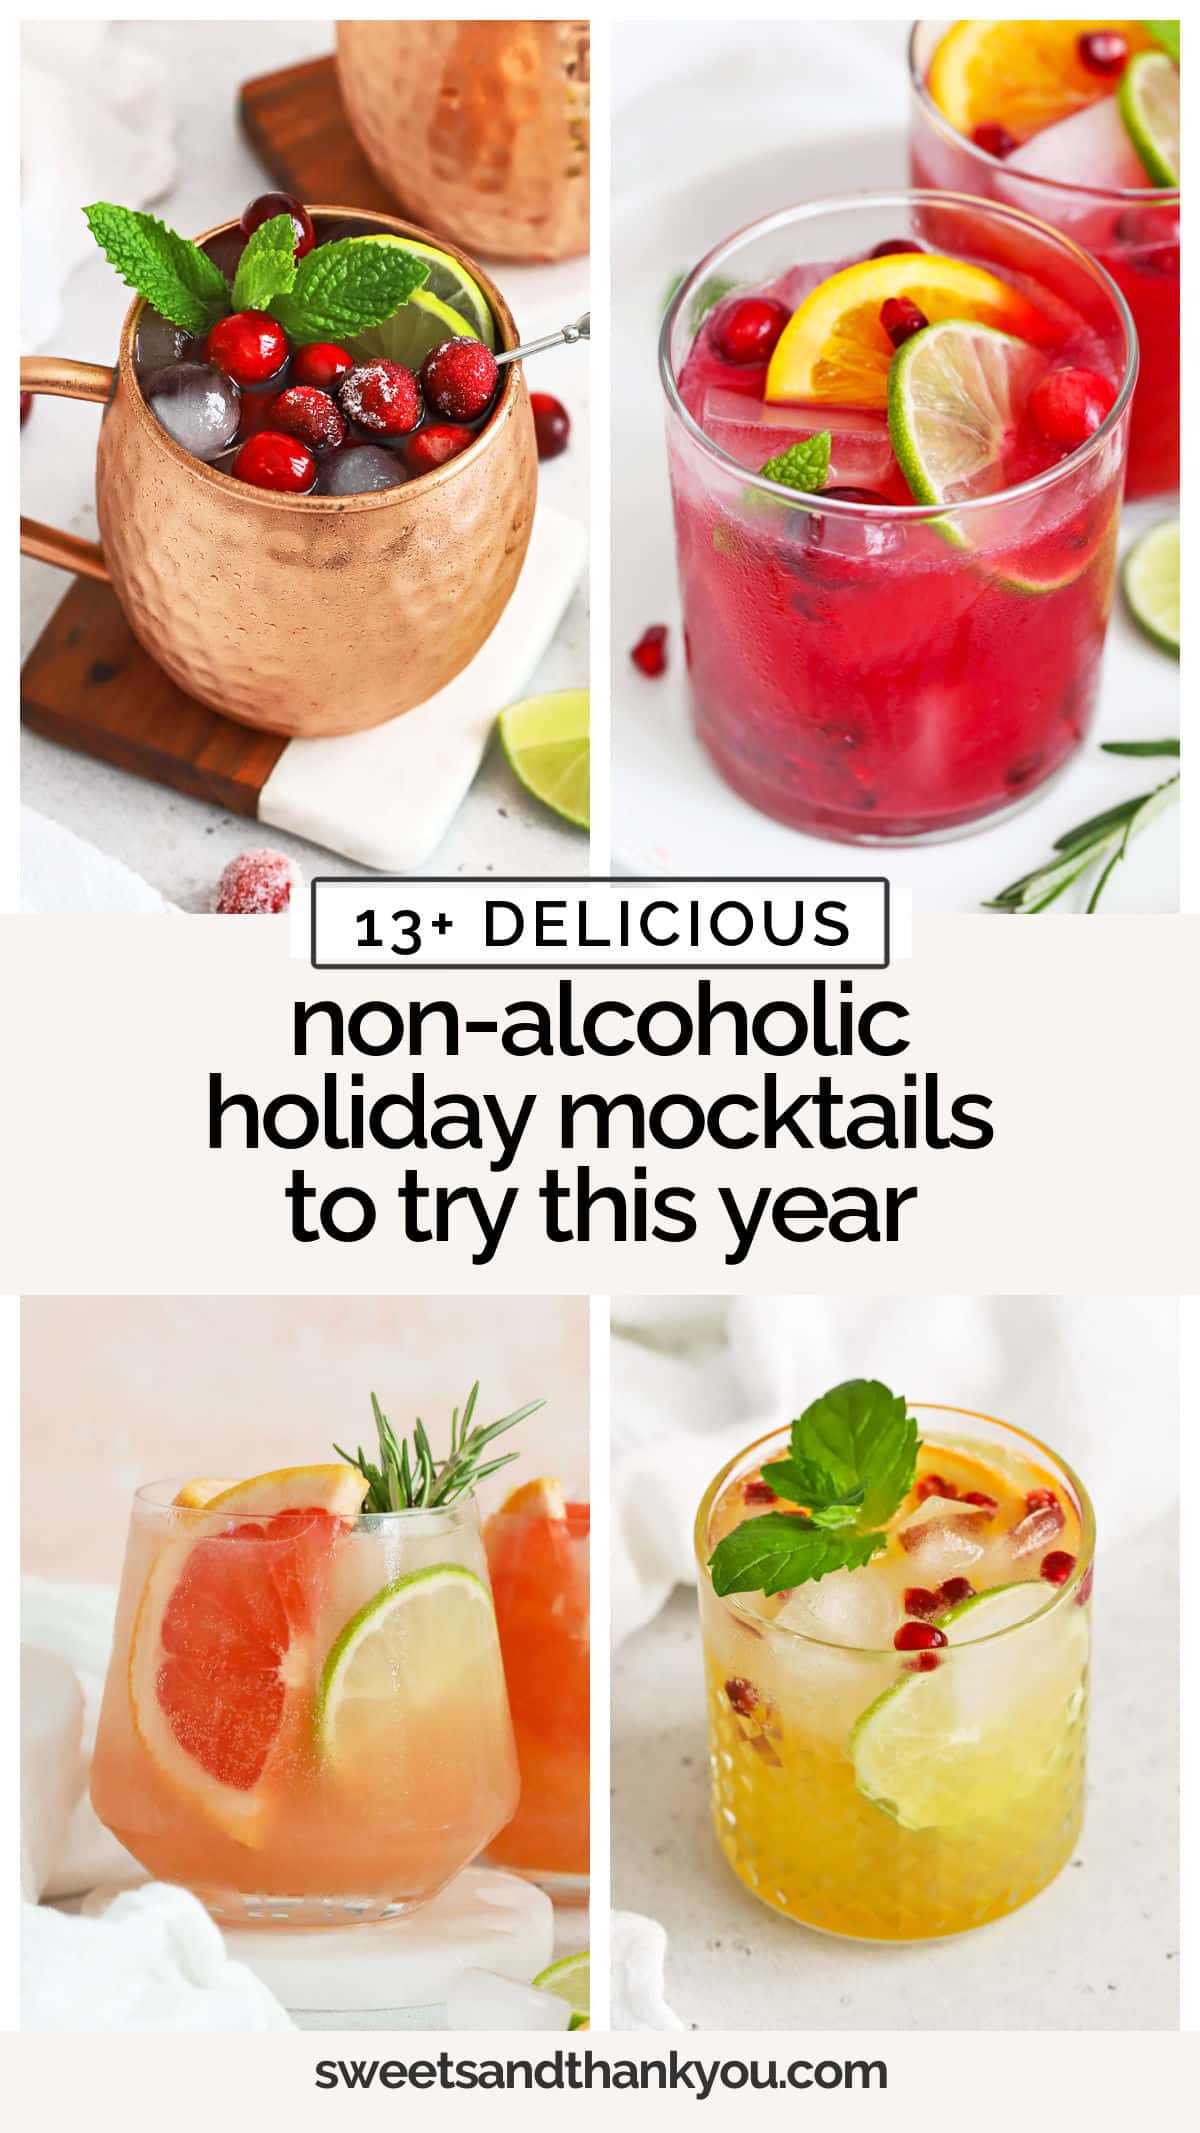 Looking for non-alcoholic Christmas drinks to serve this season? These holiday & Christmas mocktail recipes are perfect for kids & grown-ups! Choose from refreshing holiday mocktails like Non-alcoholic moscow mules and Cranberry Lime spriters to kid-friendly Christmas drinks like Shirley Temples & Mint Limeade. There's a festive Christmas drink for everyone! 